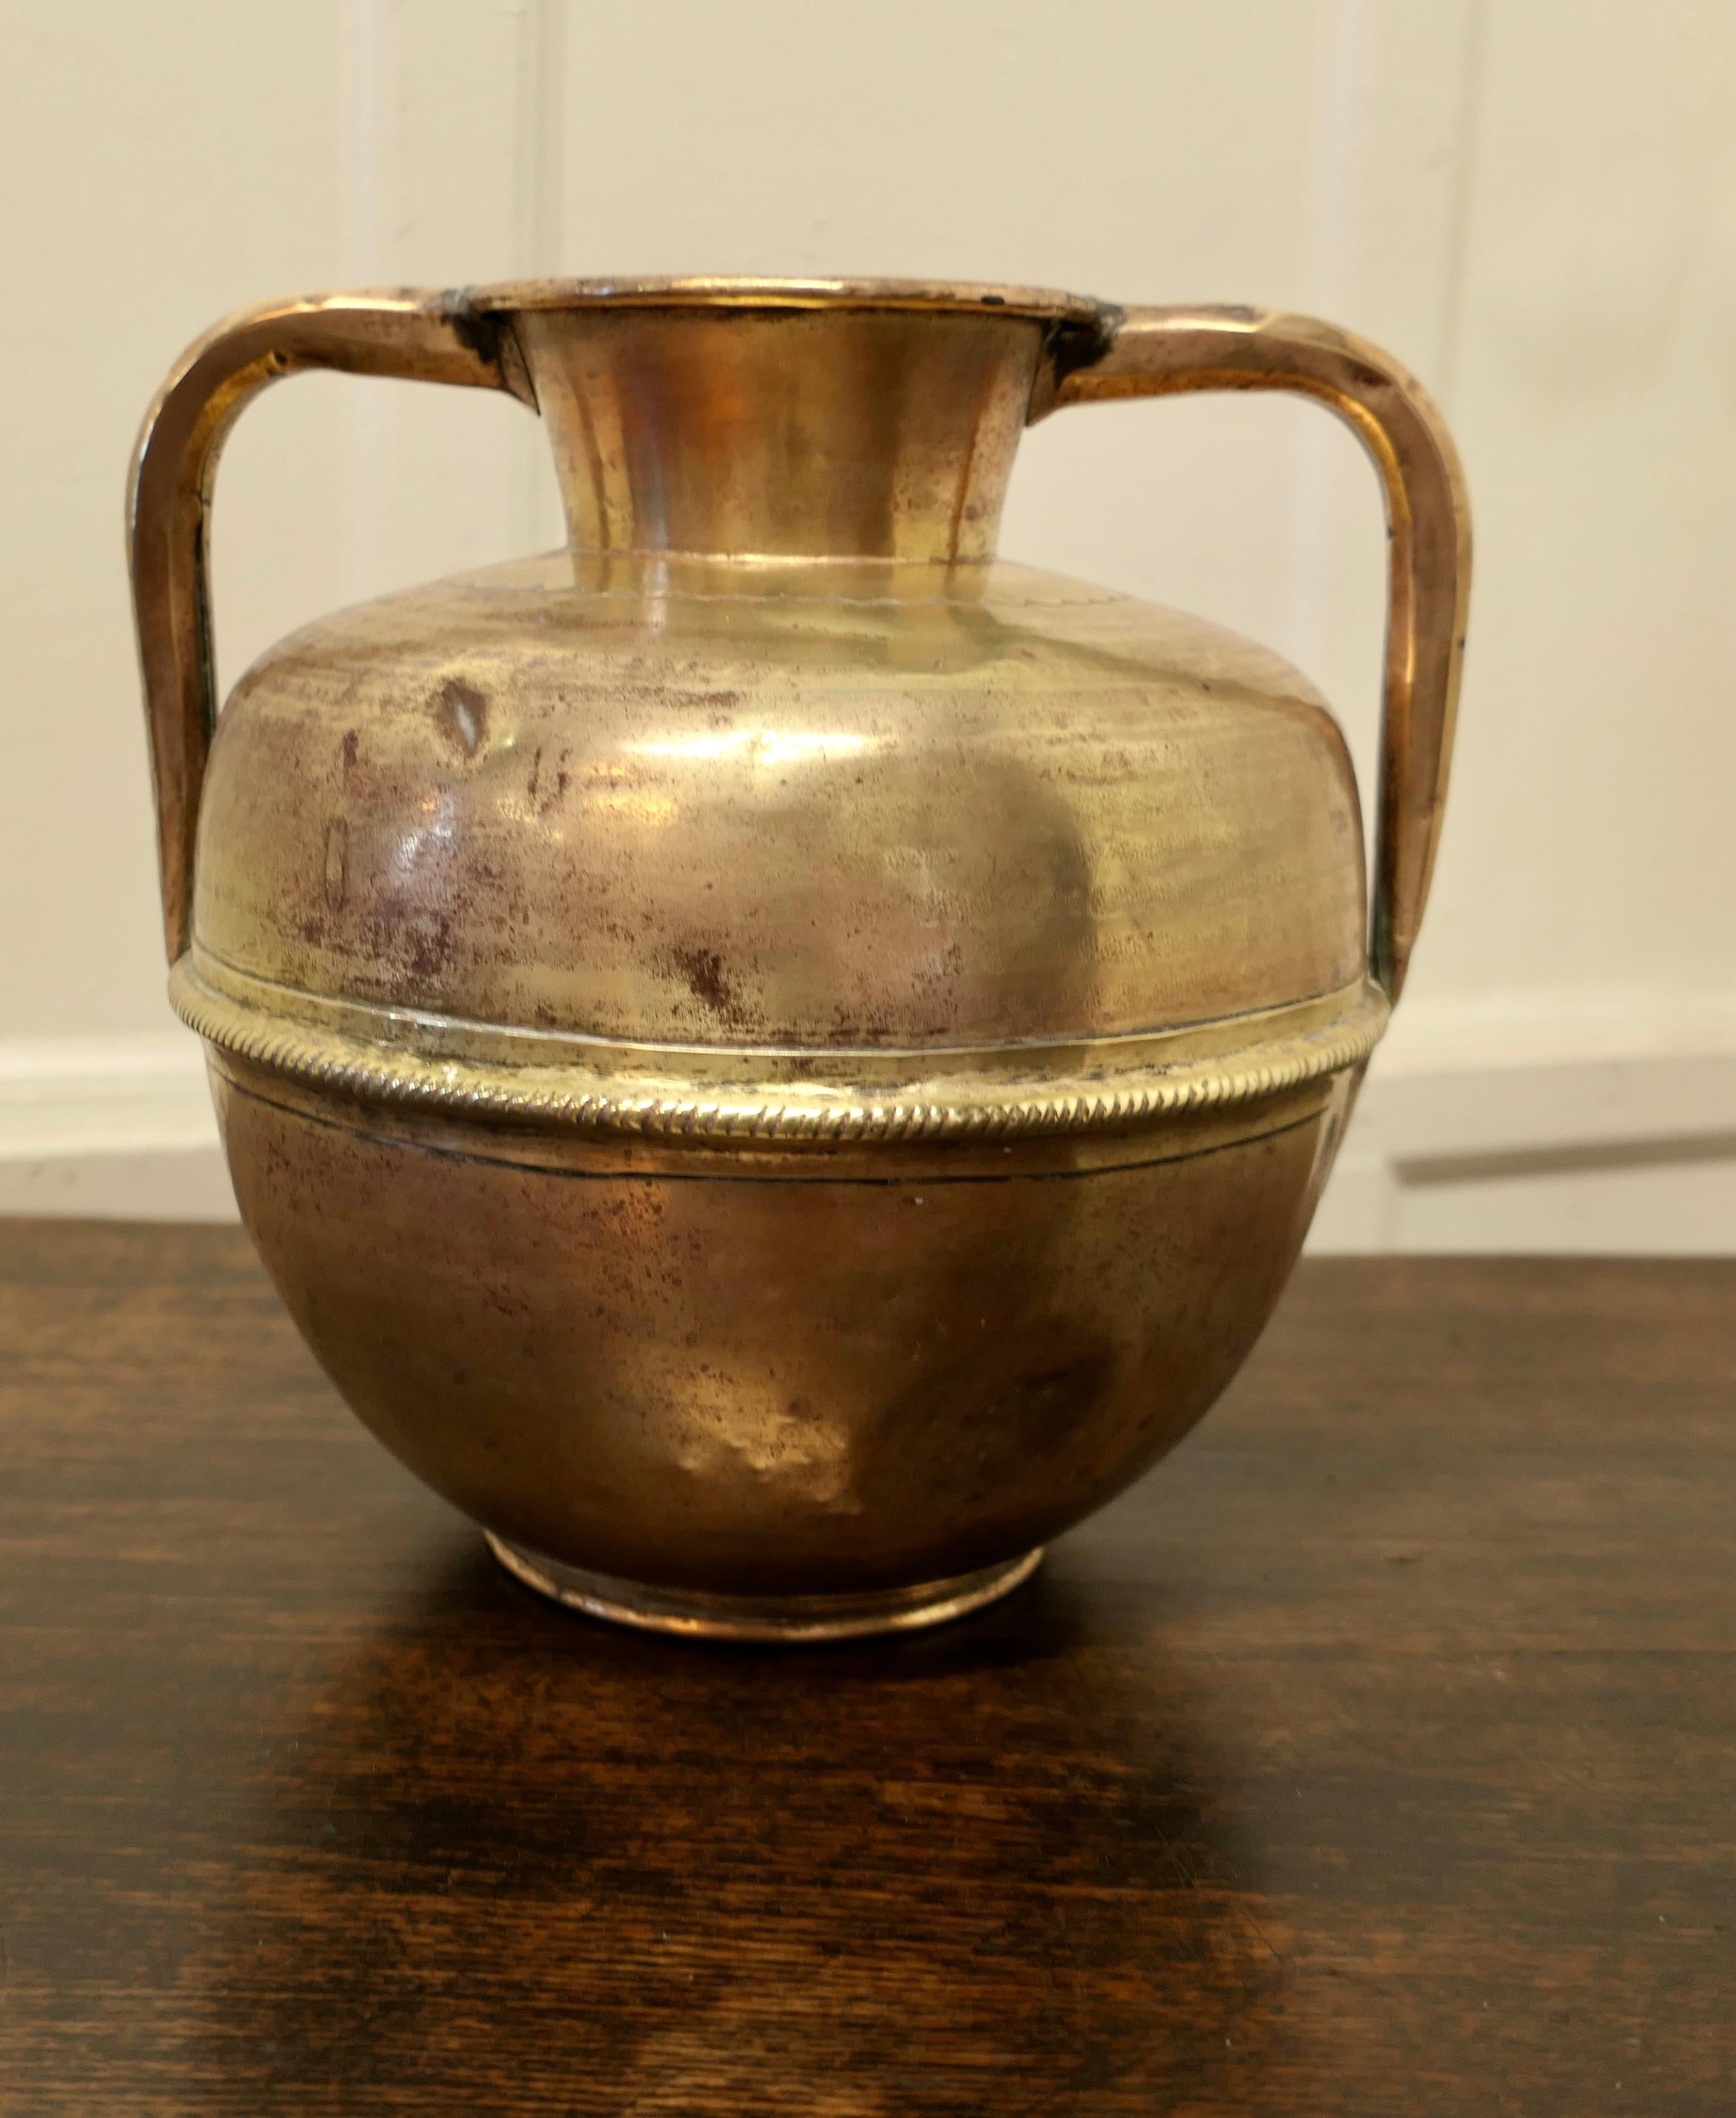 Arts and Crafts brass urn with handles.

A lovely old piece, in solid beaten brass, the vase has a “Pot Belly” shape with 2 jug handles at the top.
The vase in used condition with a few dents and lots of character, it is 11” high and 11” in